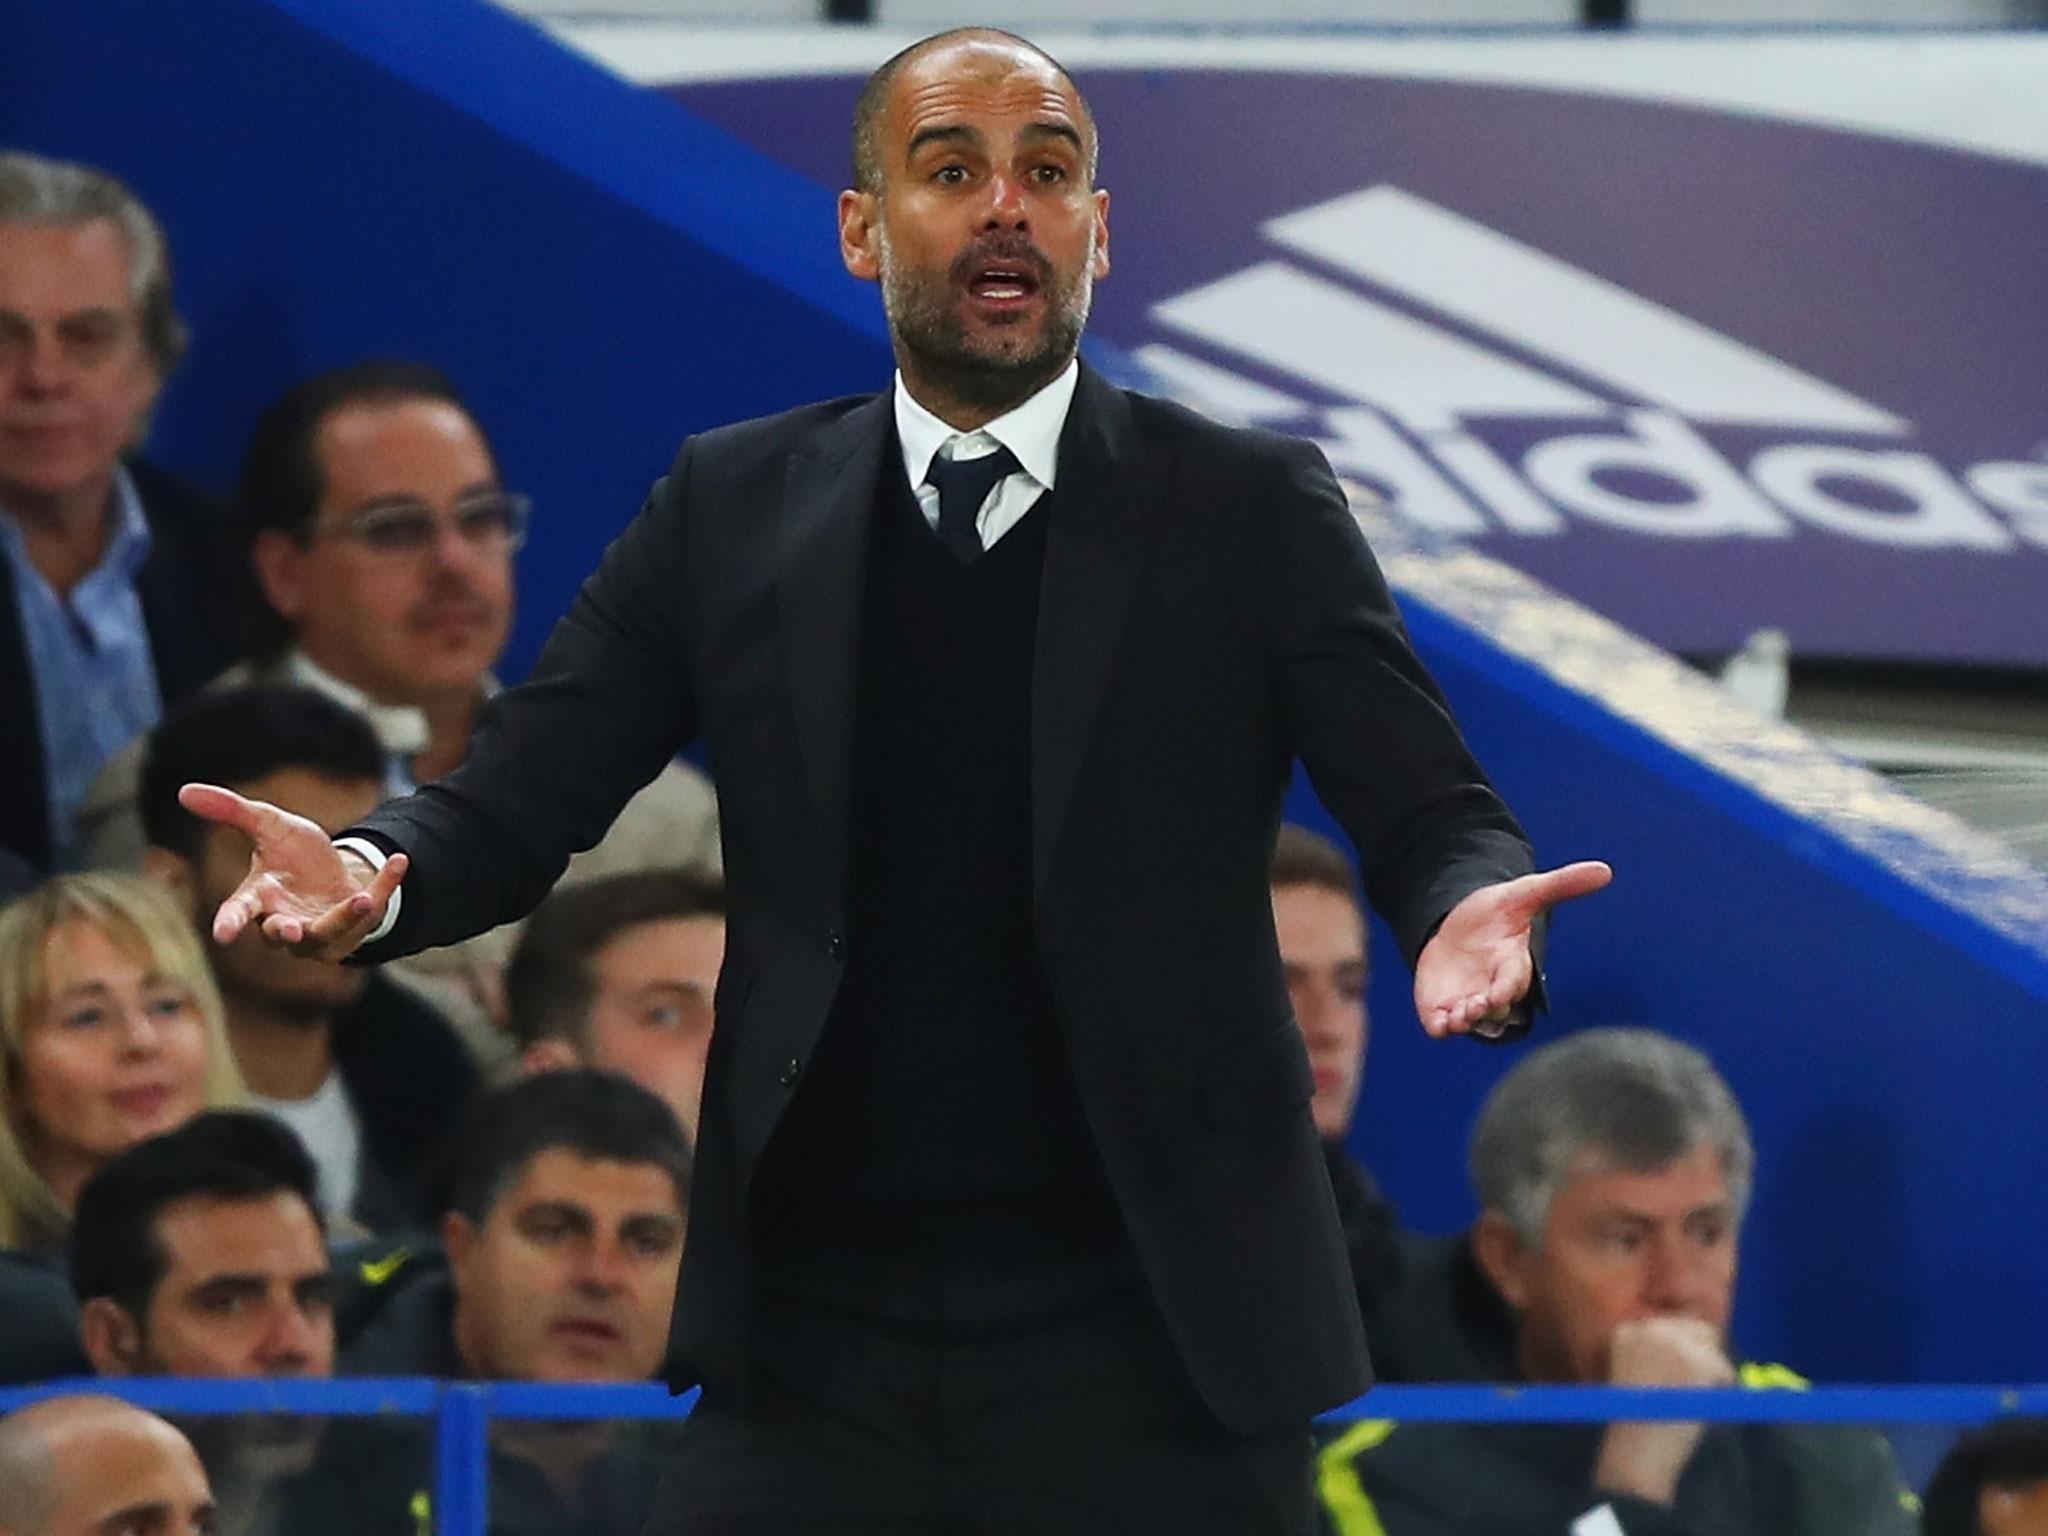 Pep Guardiola was expected to challenge for the Premier League title, not Antonio Conte